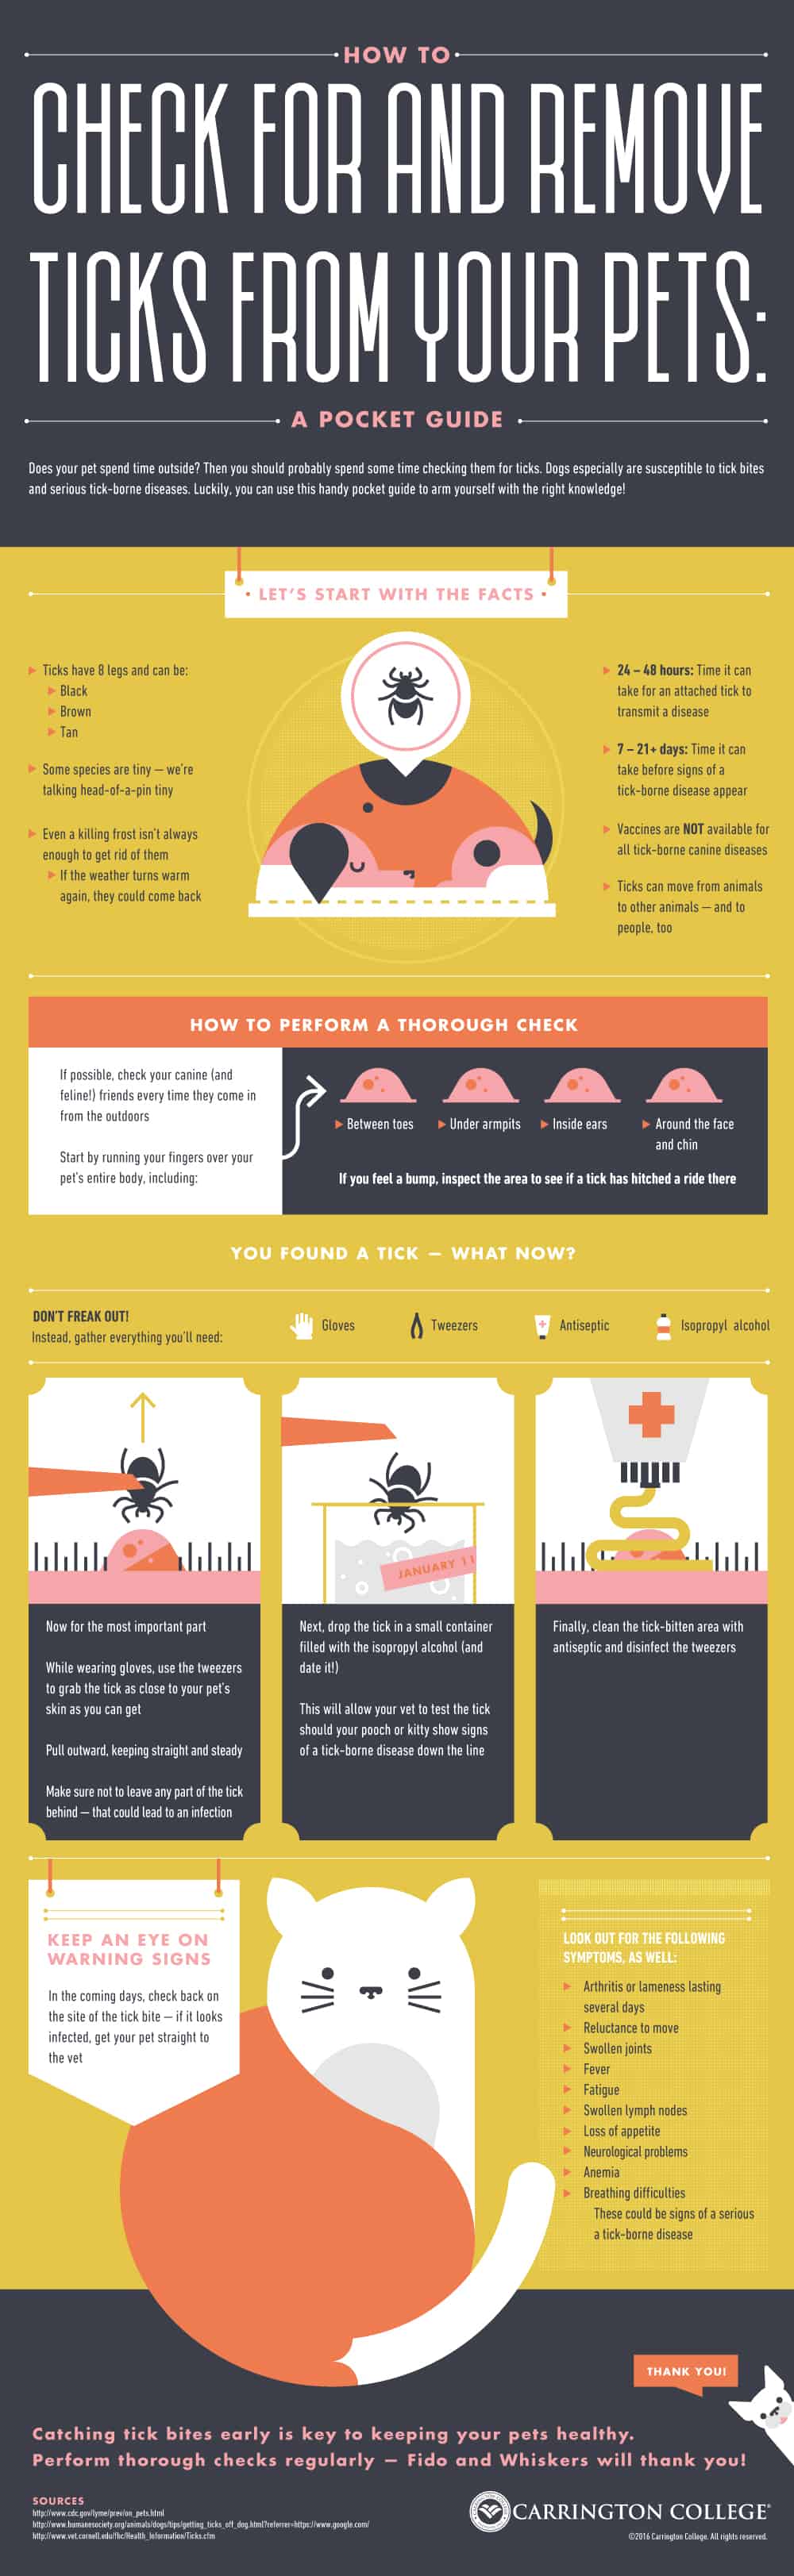 Check For And Remove Ticks From Your Pets Infographic Compliance Approved